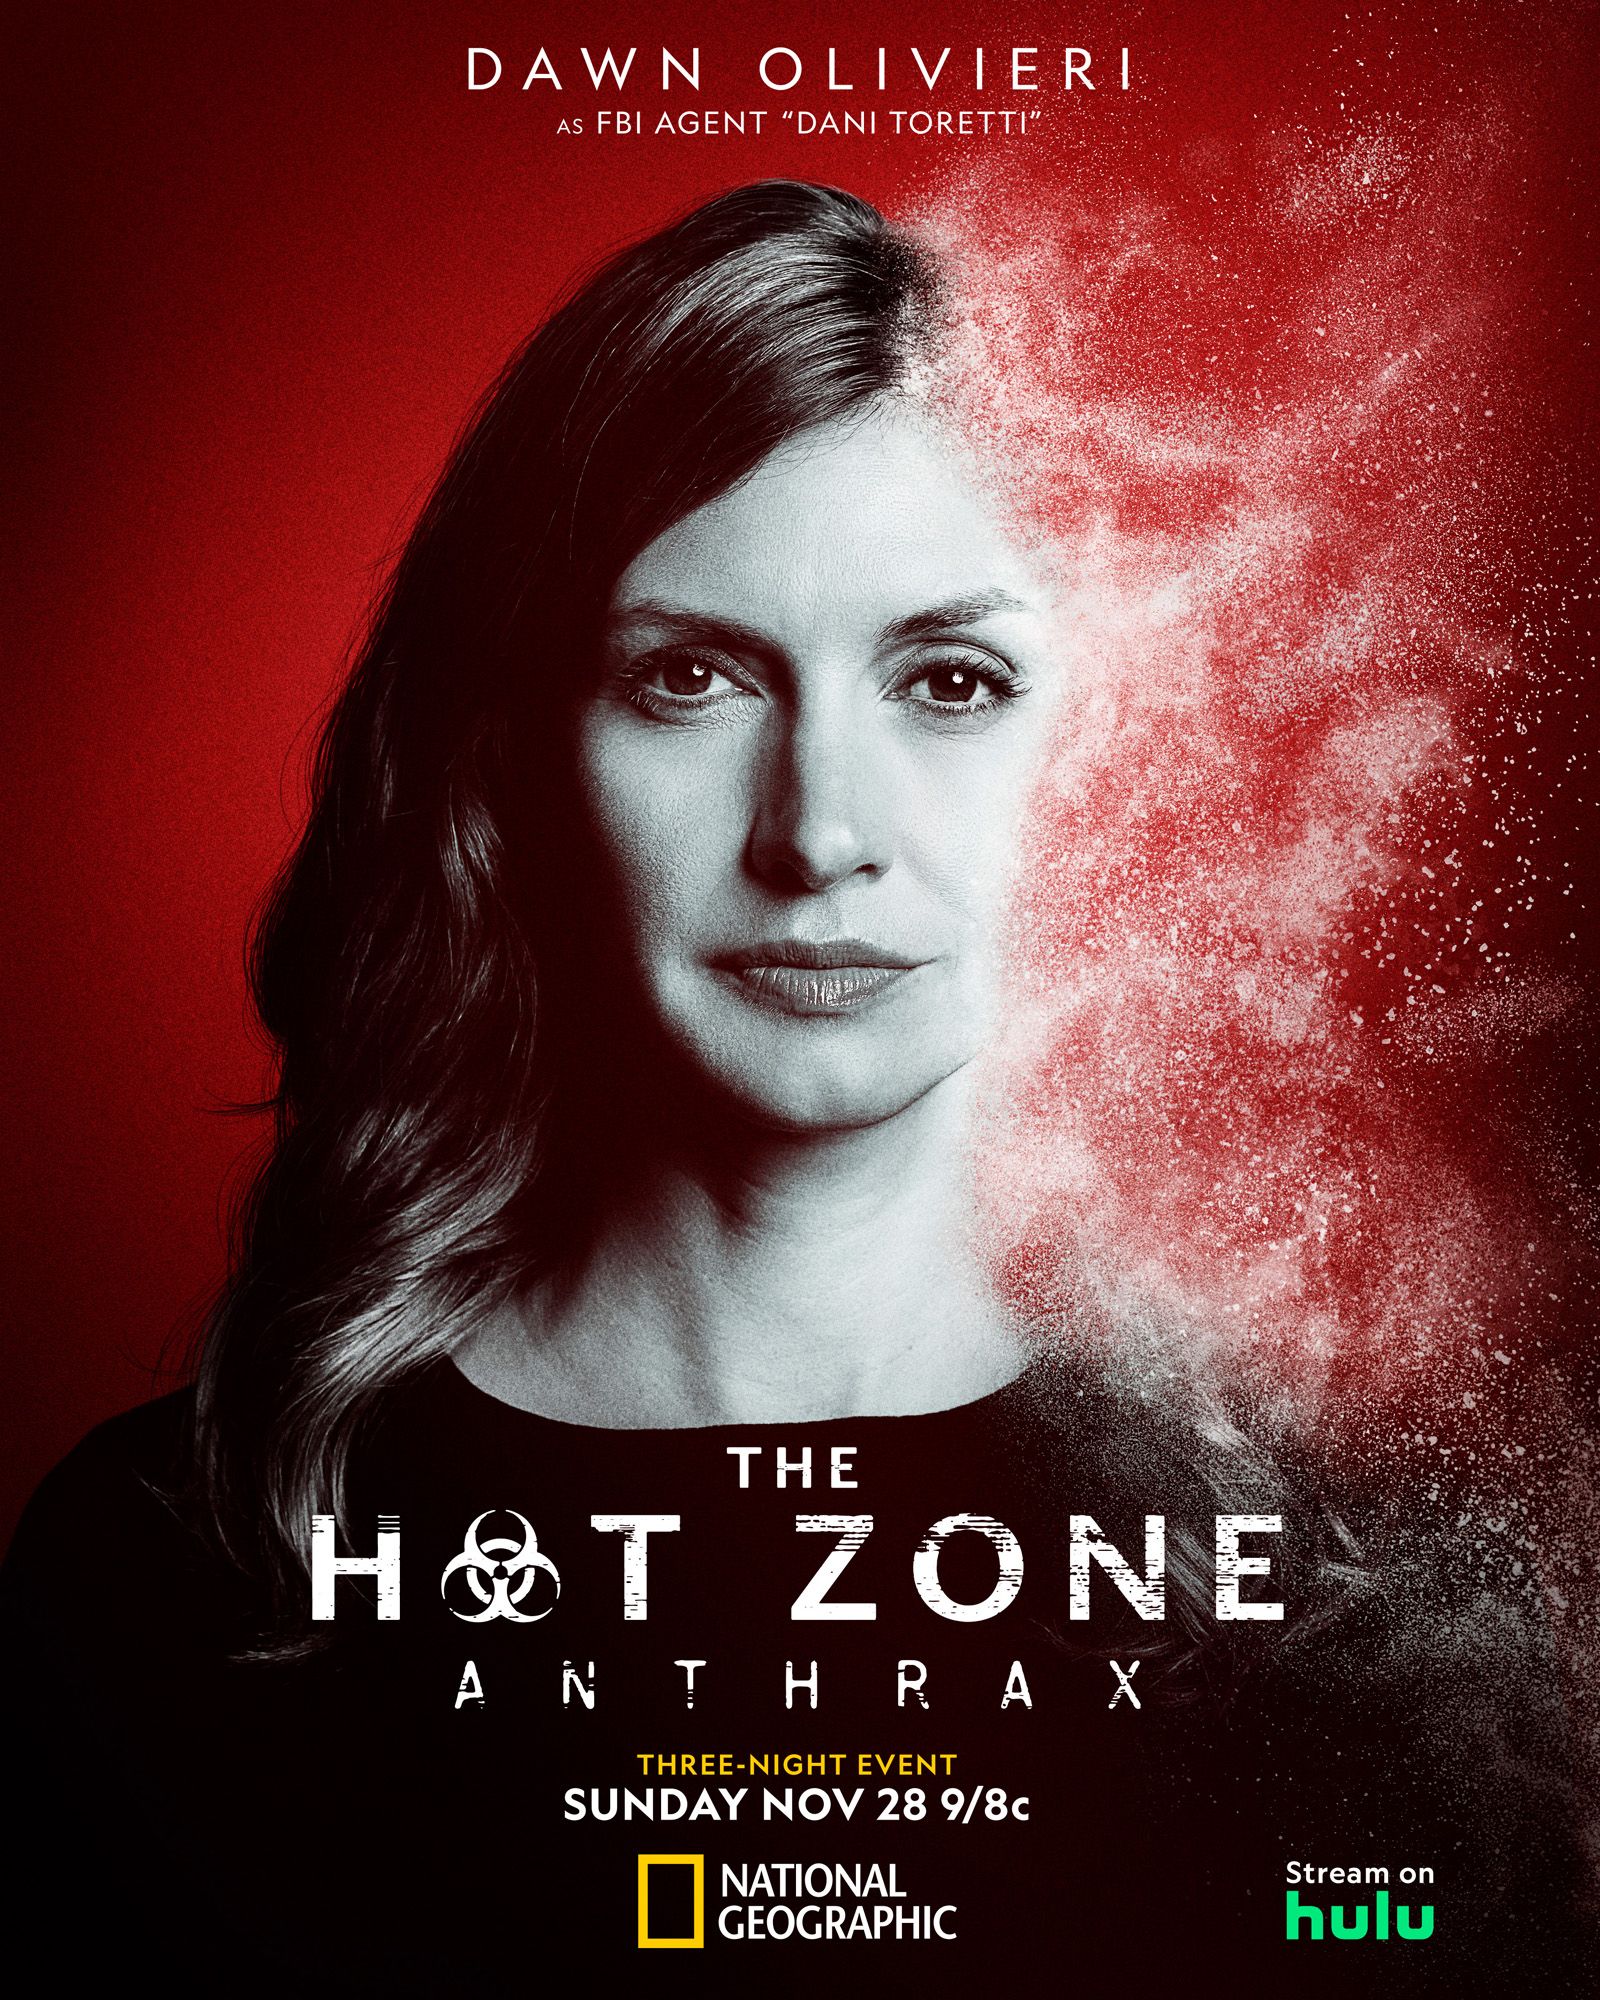 The Hot Zone Anthrax Posters Tease An Epic Cast [Exclusive]